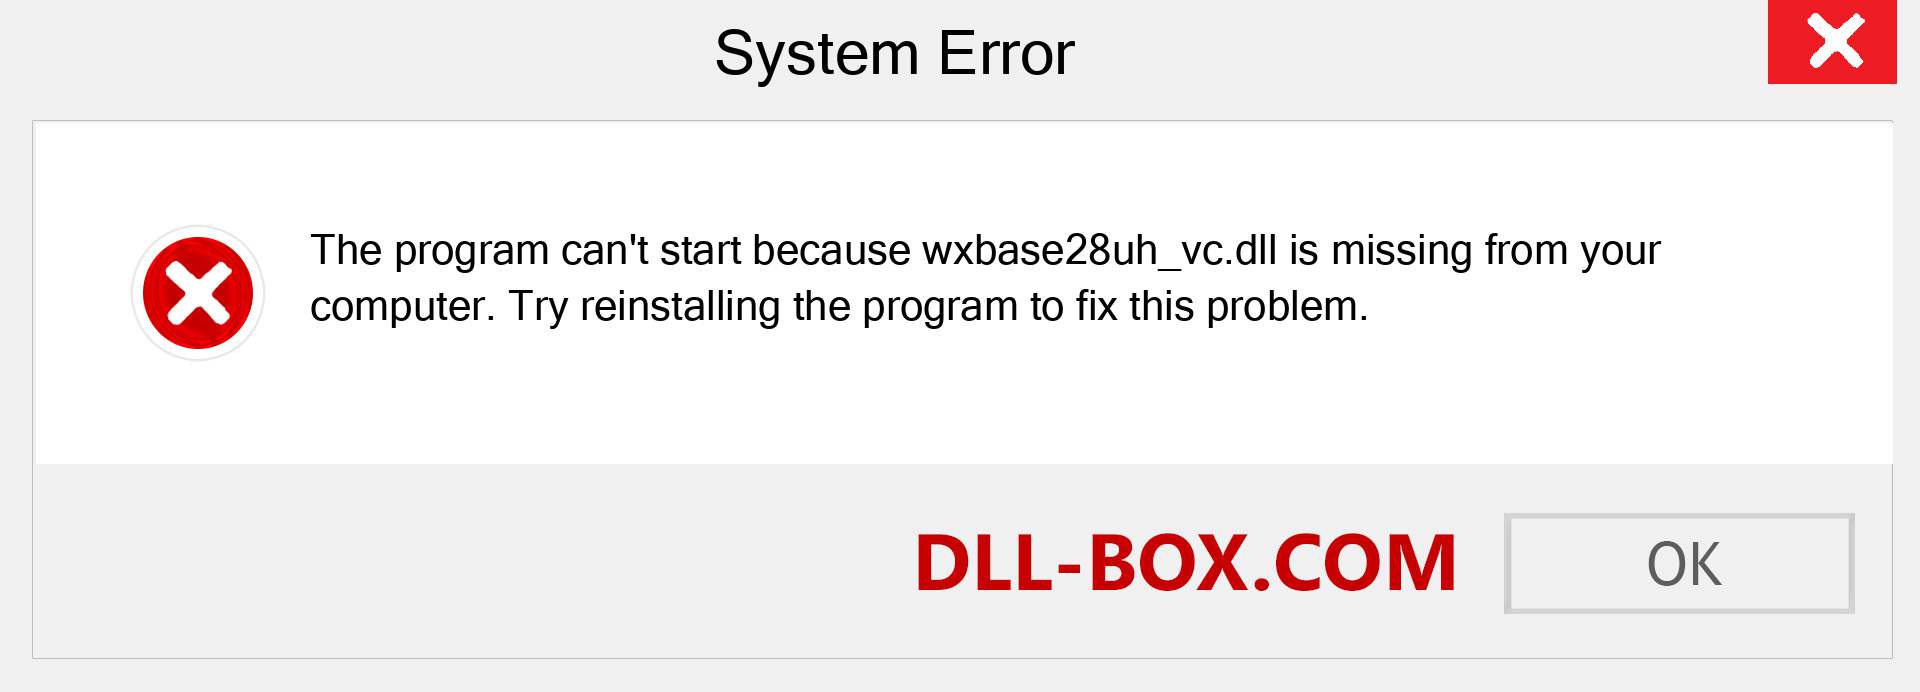  wxbase28uh_vc.dll file is missing?. Download for Windows 7, 8, 10 - Fix  wxbase28uh_vc dll Missing Error on Windows, photos, images